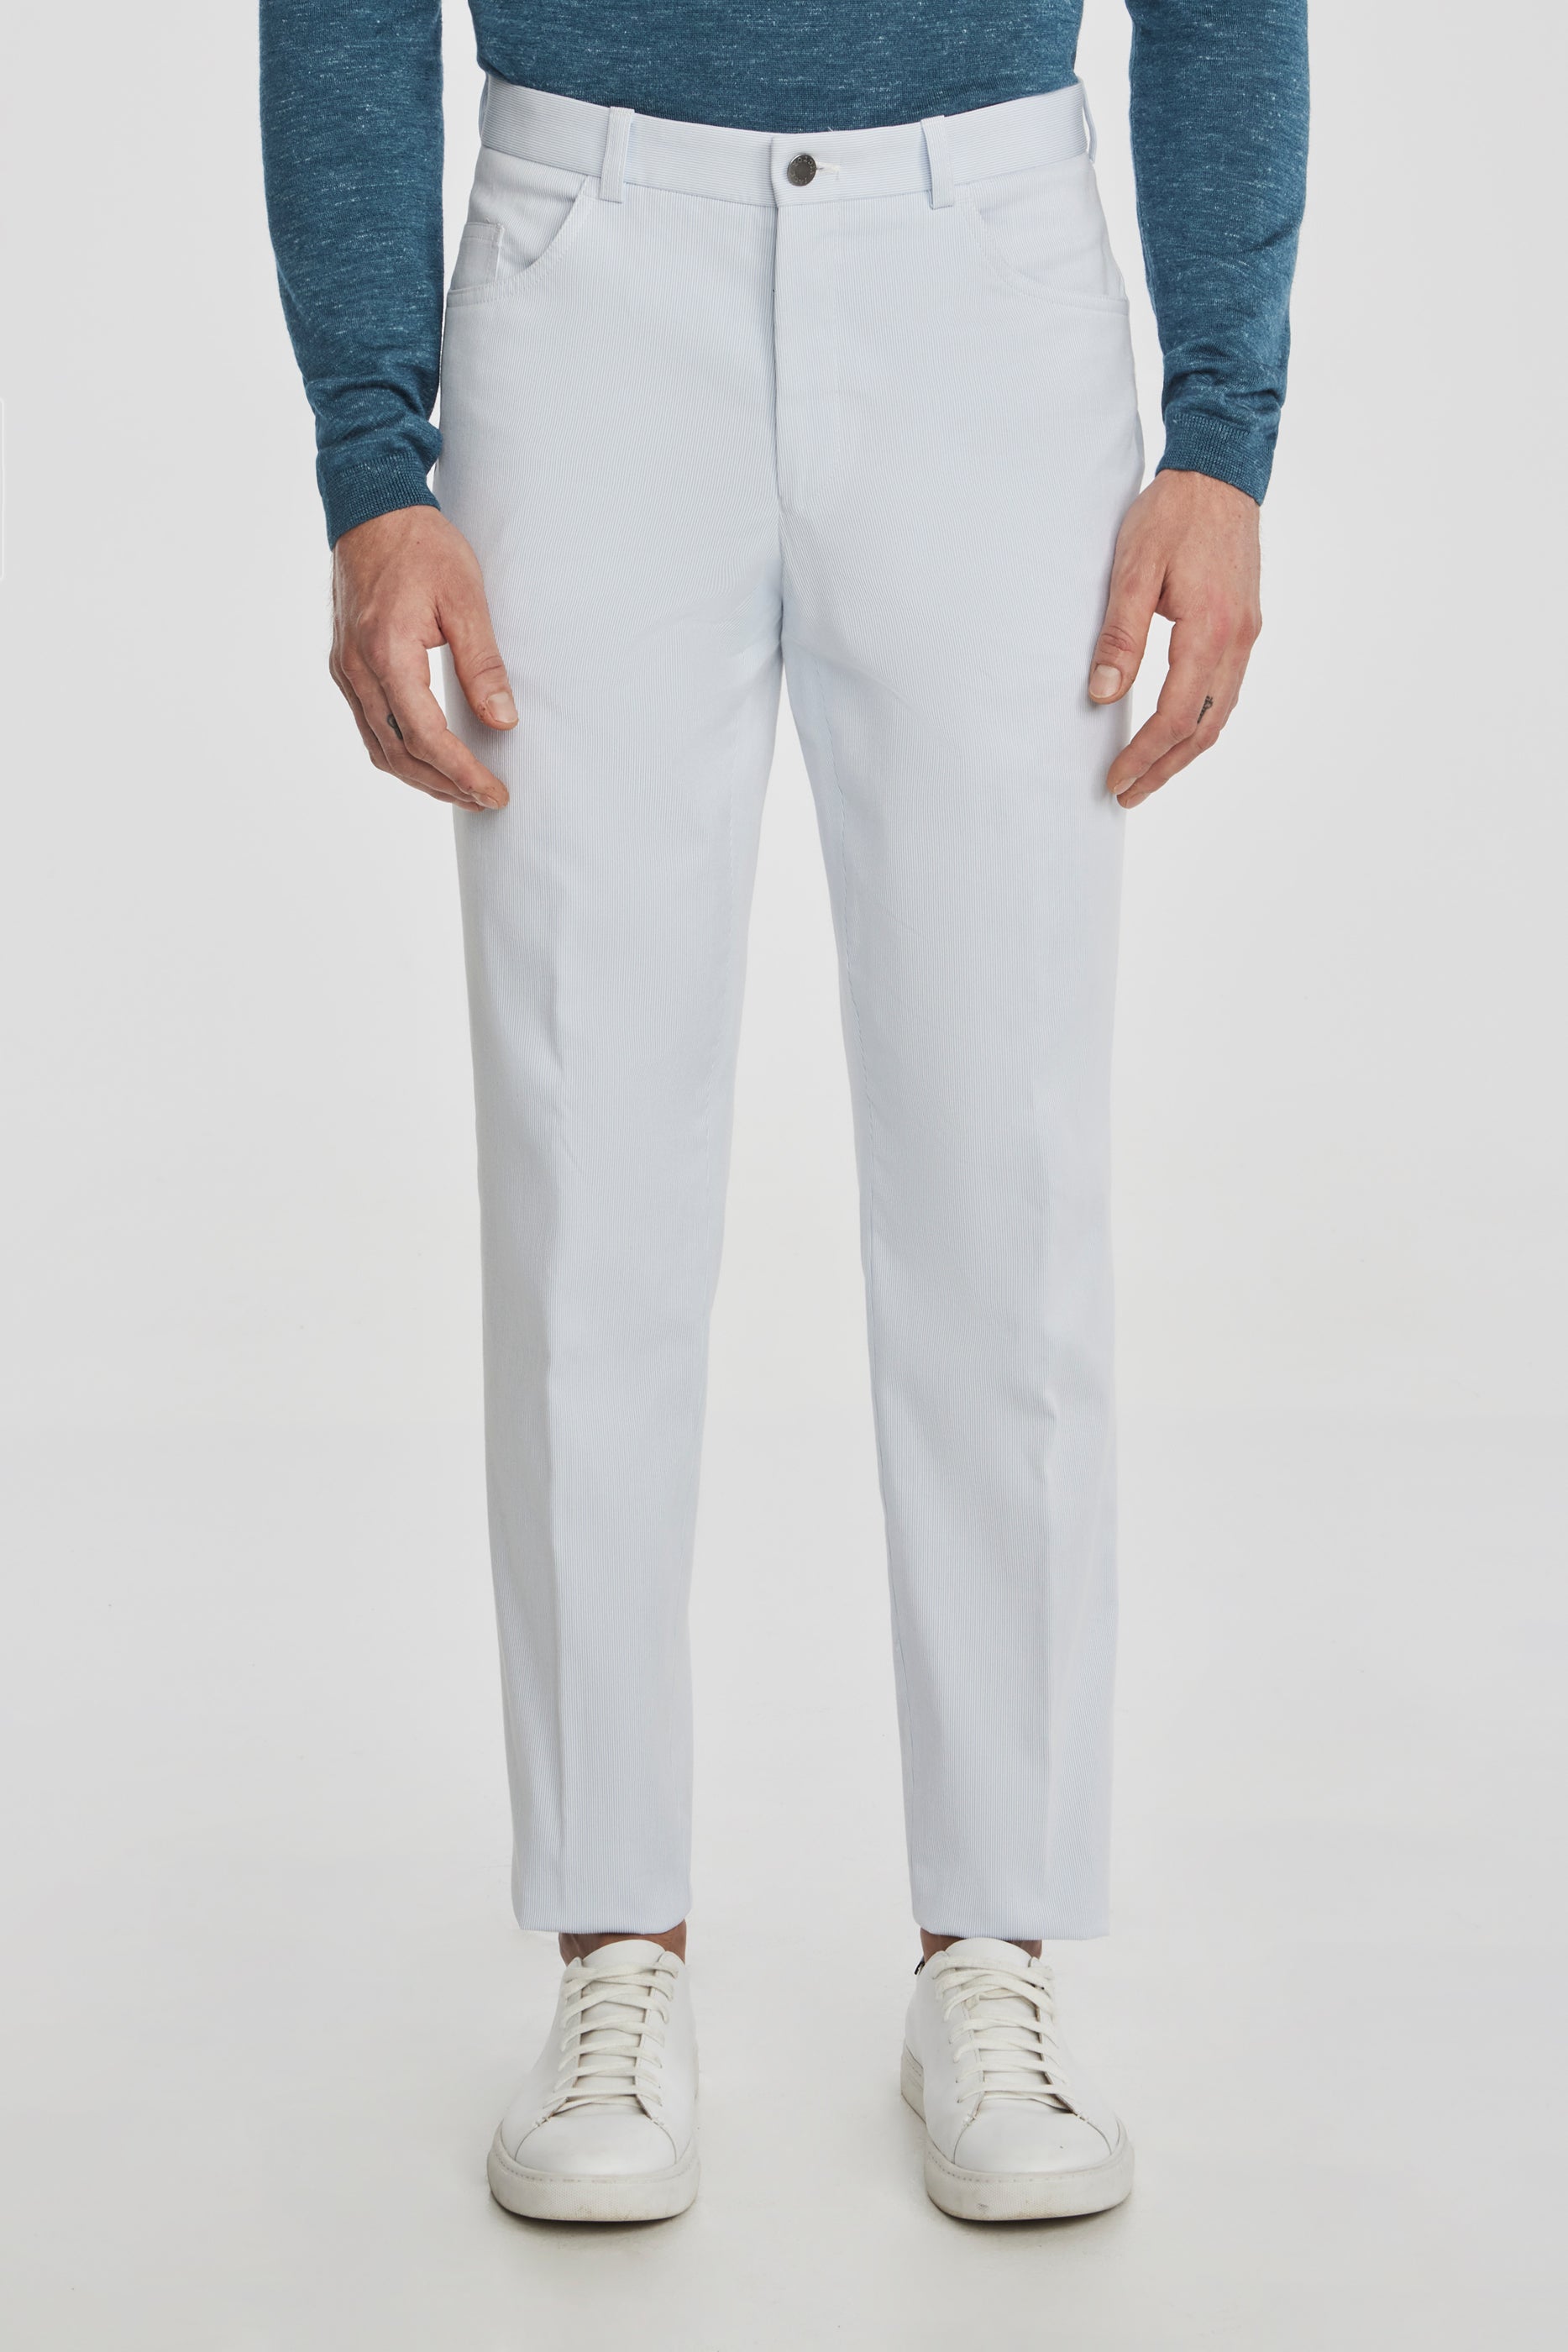 Alt view Pinfeather Sage 5-Pocket Stretch Cotton Pant in Light Blue